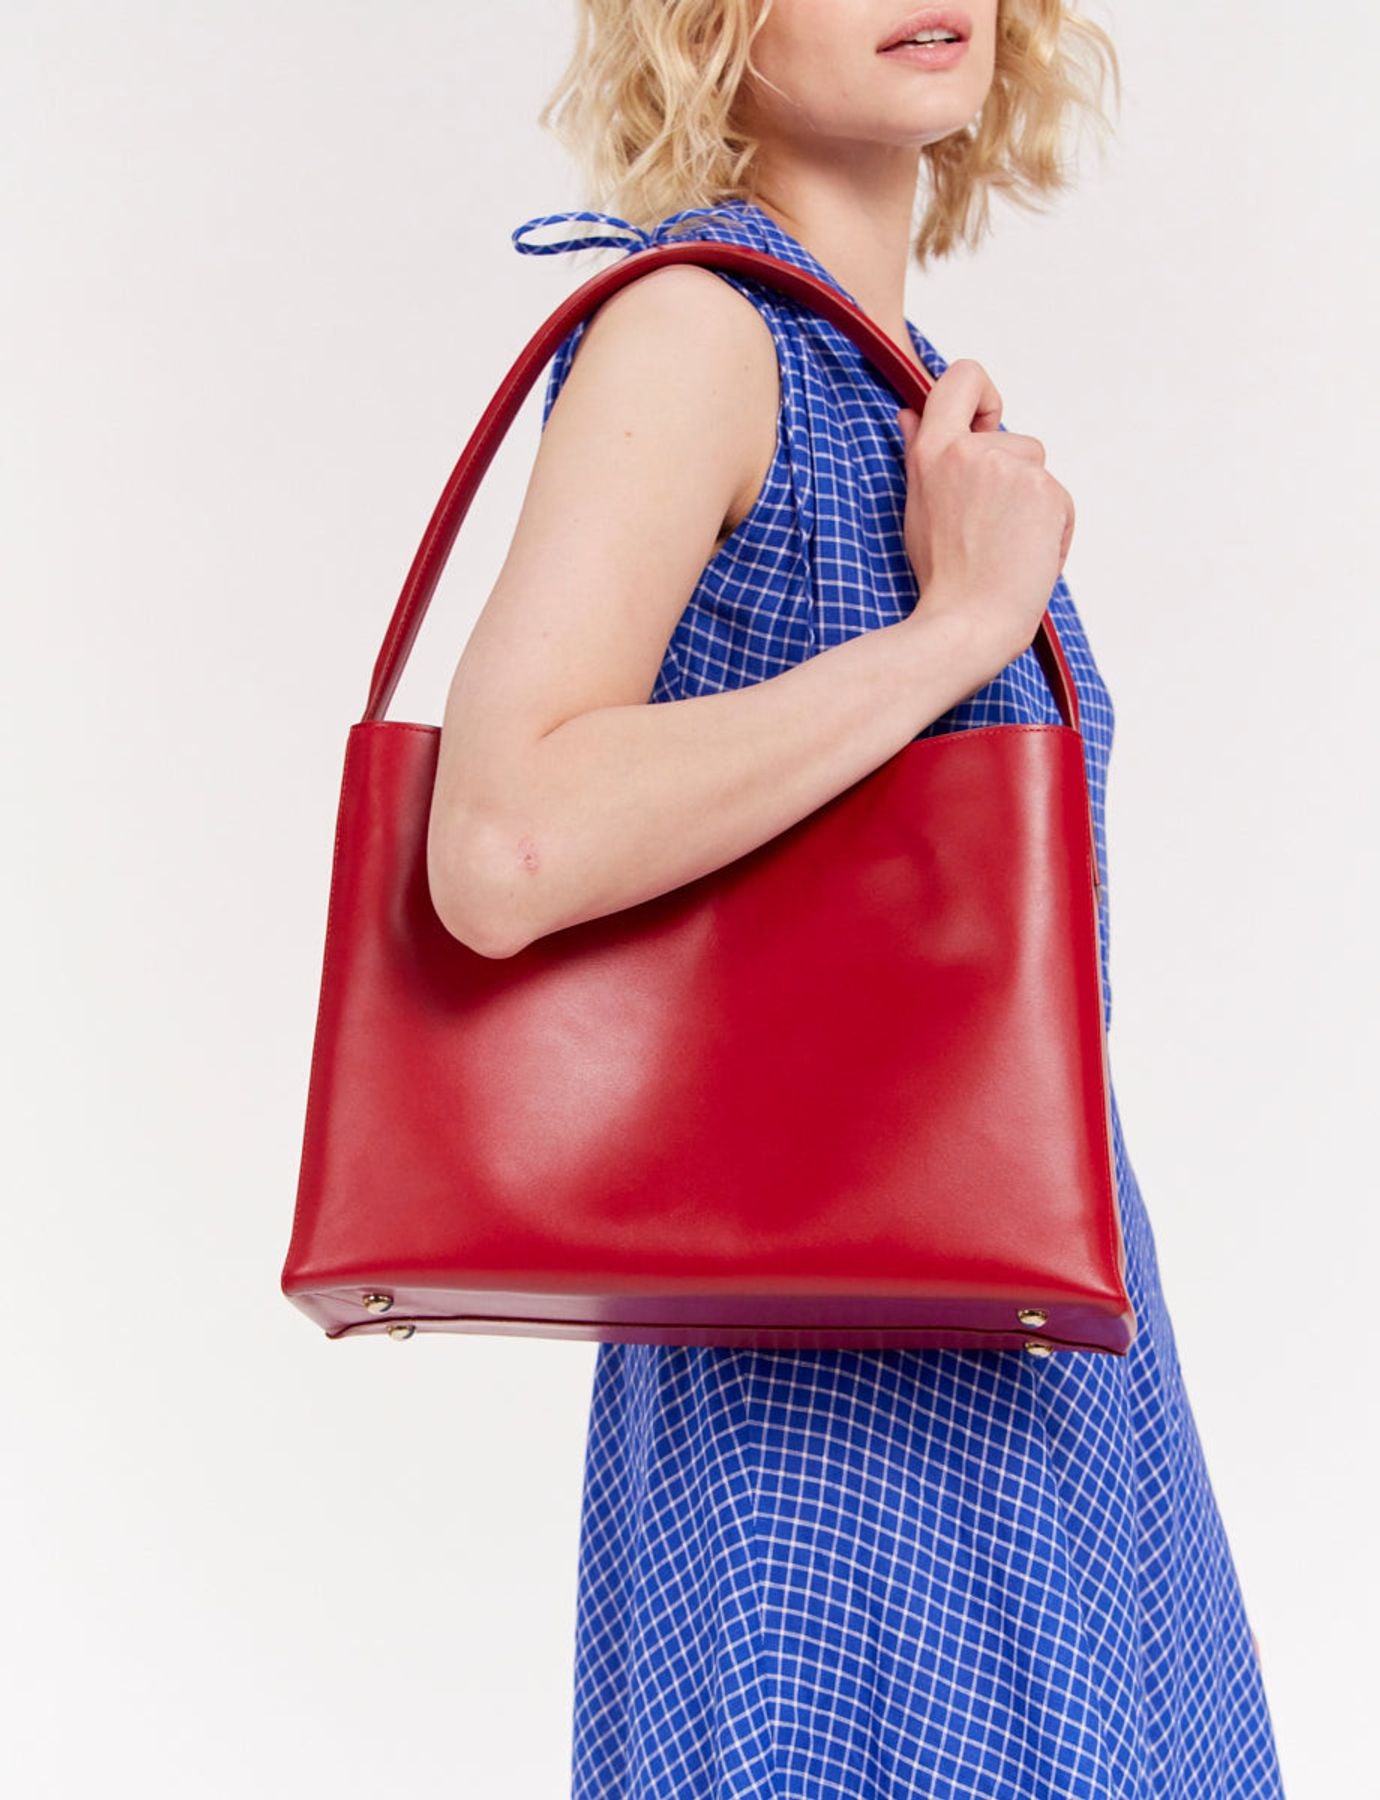 bag-leonore-l-cuir-red